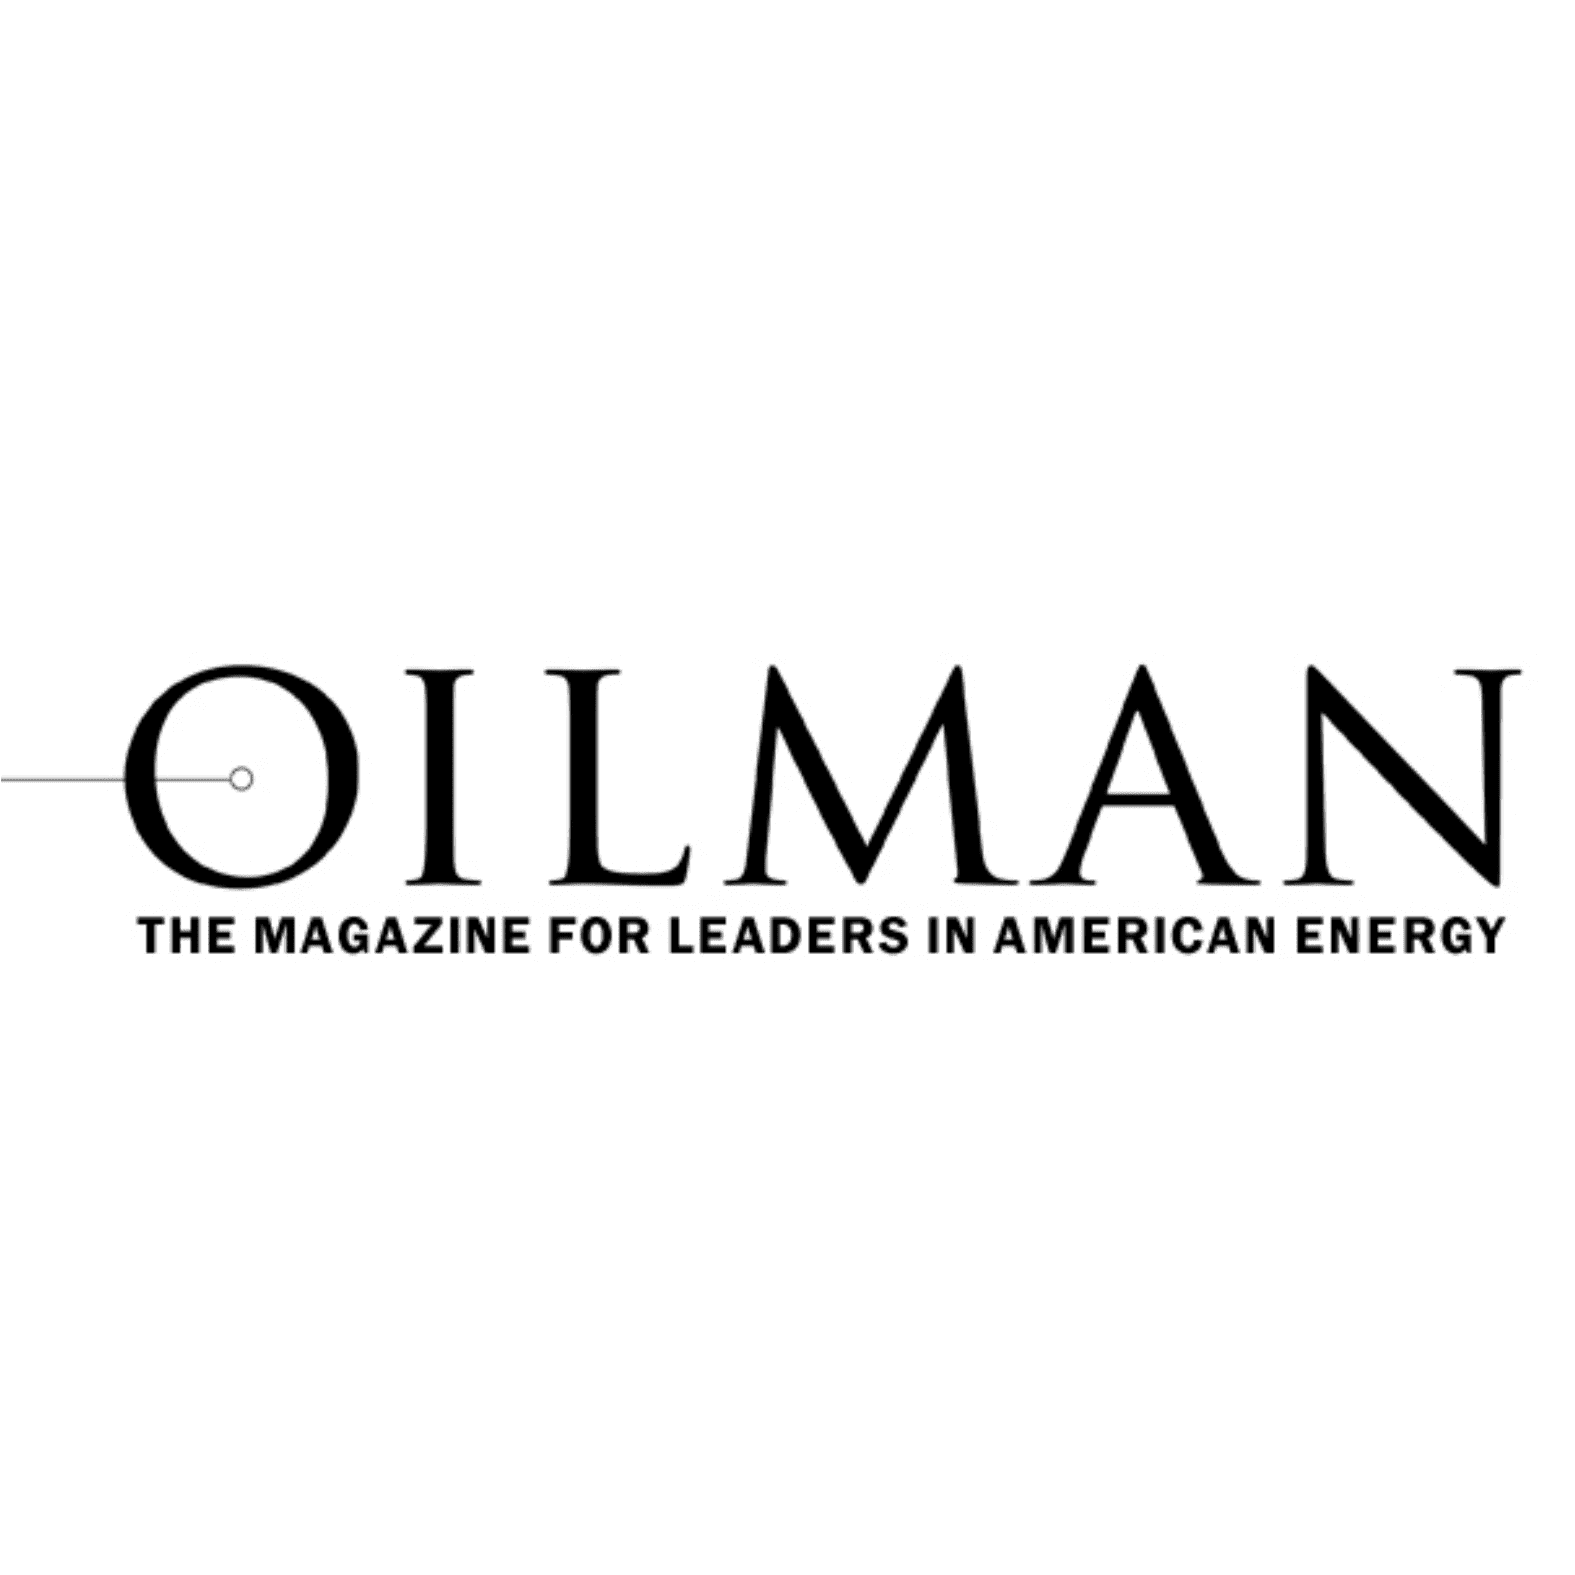 Oilman The Magazine for Leaders in American Energy